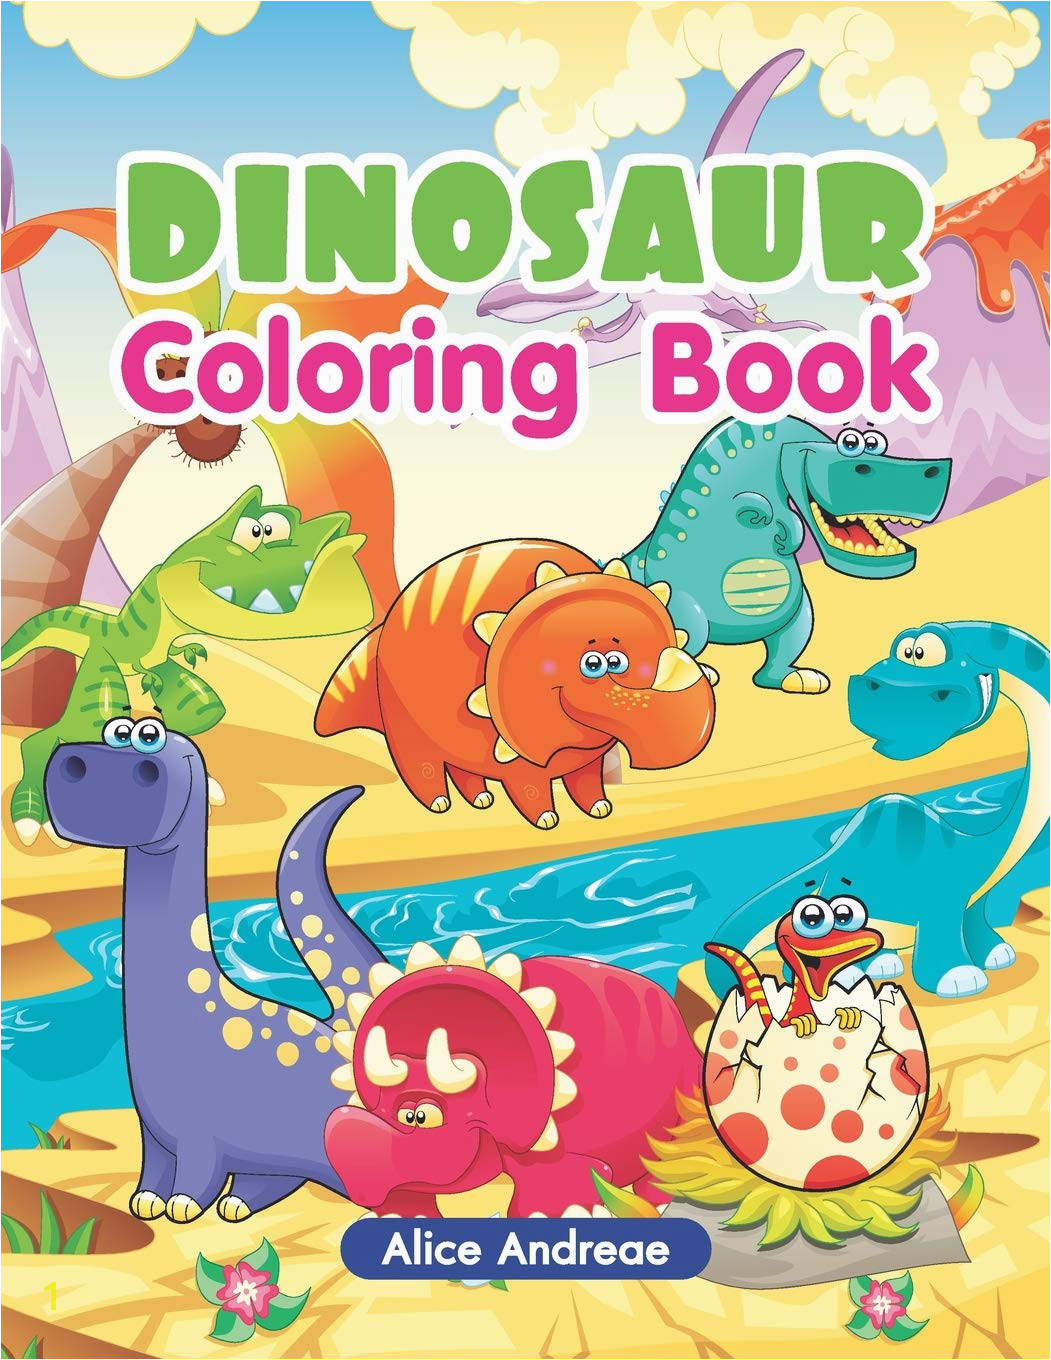 Cartoon Dinosaur Coloring Pages Dinosaur Coloring Book An Adult Coloring Book with Fun